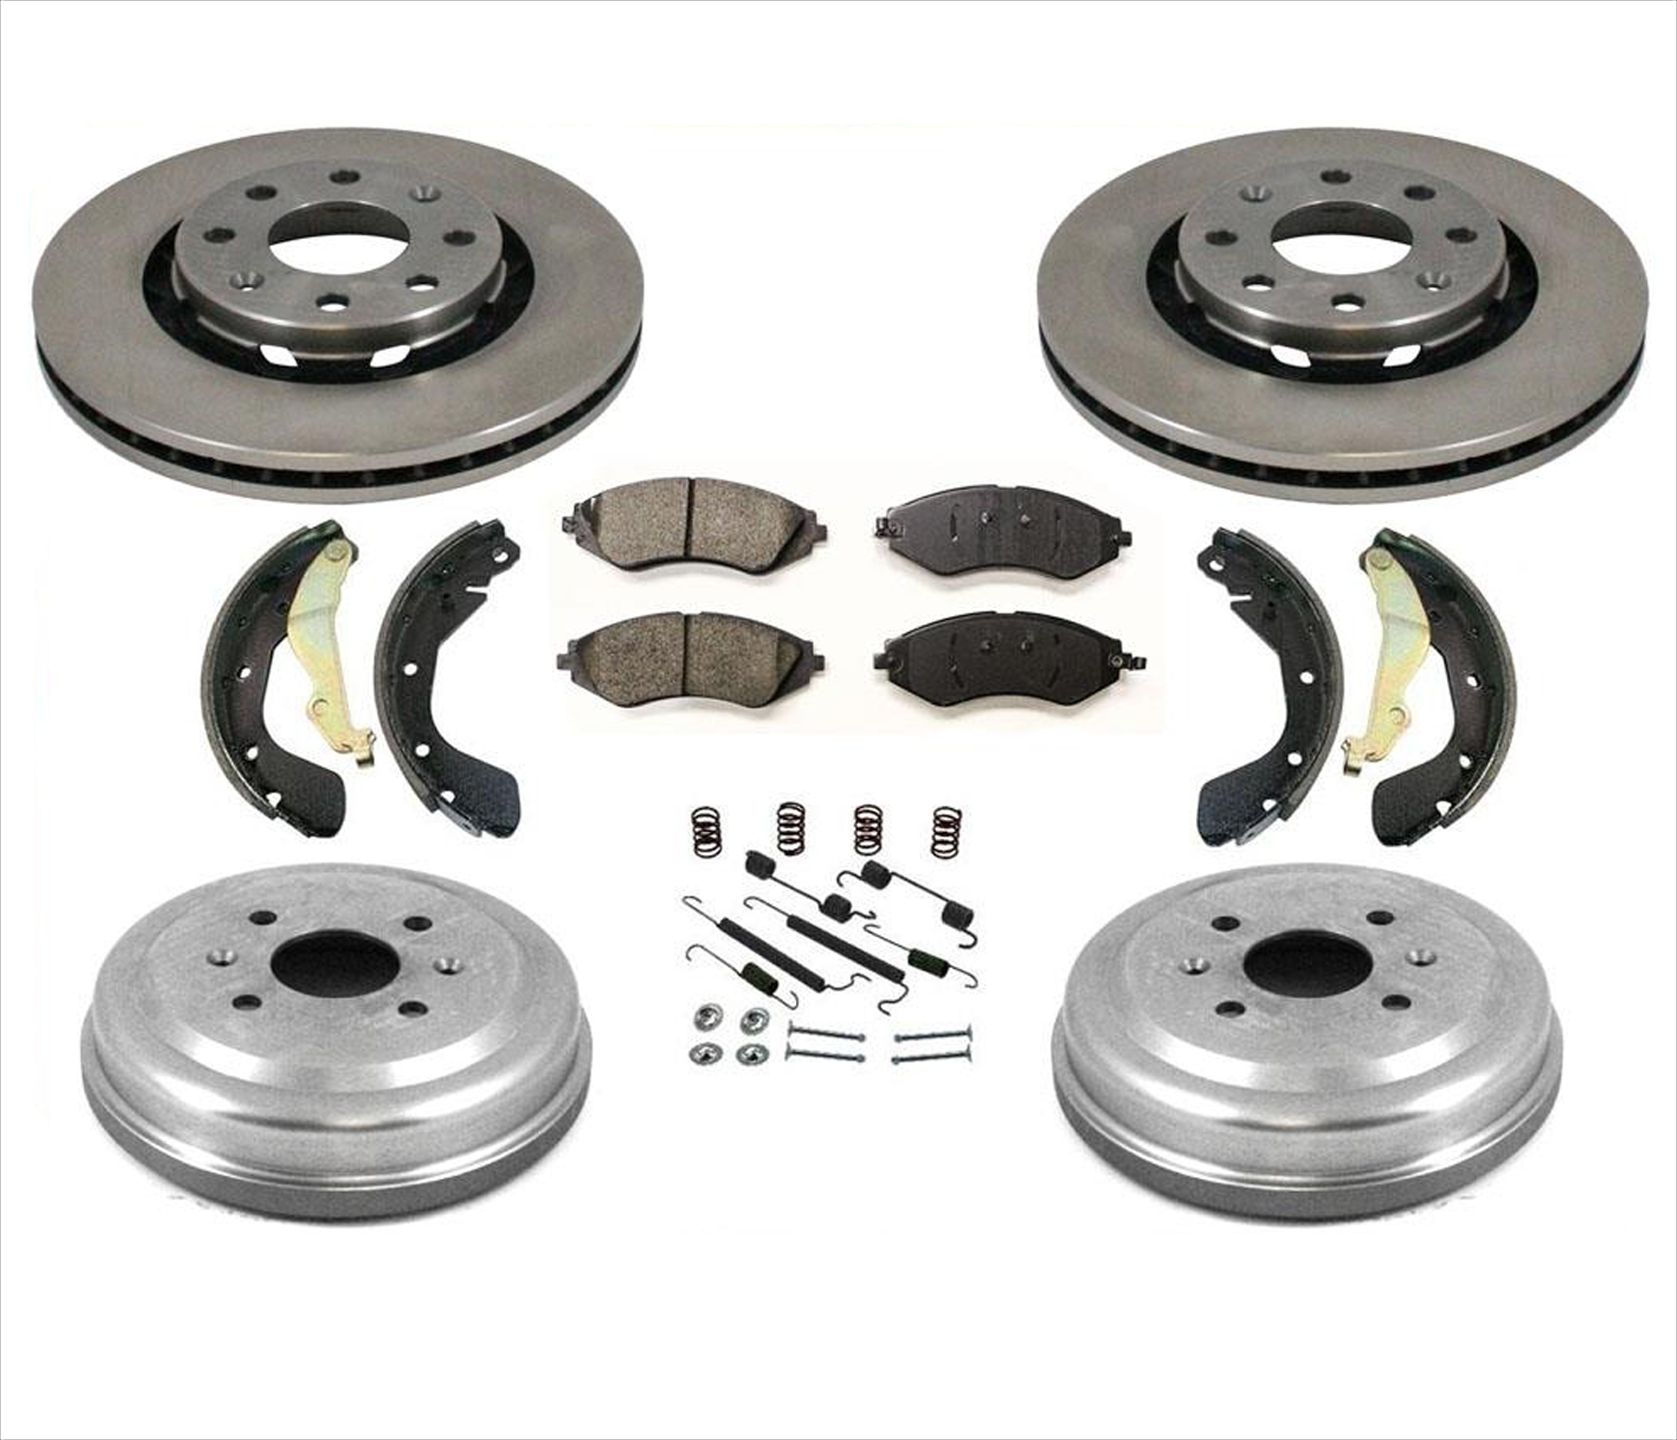 Rotors Brakes Drums Shoes Spring Kit for Chevrolet Aveo Fits Pontiac G3 ...